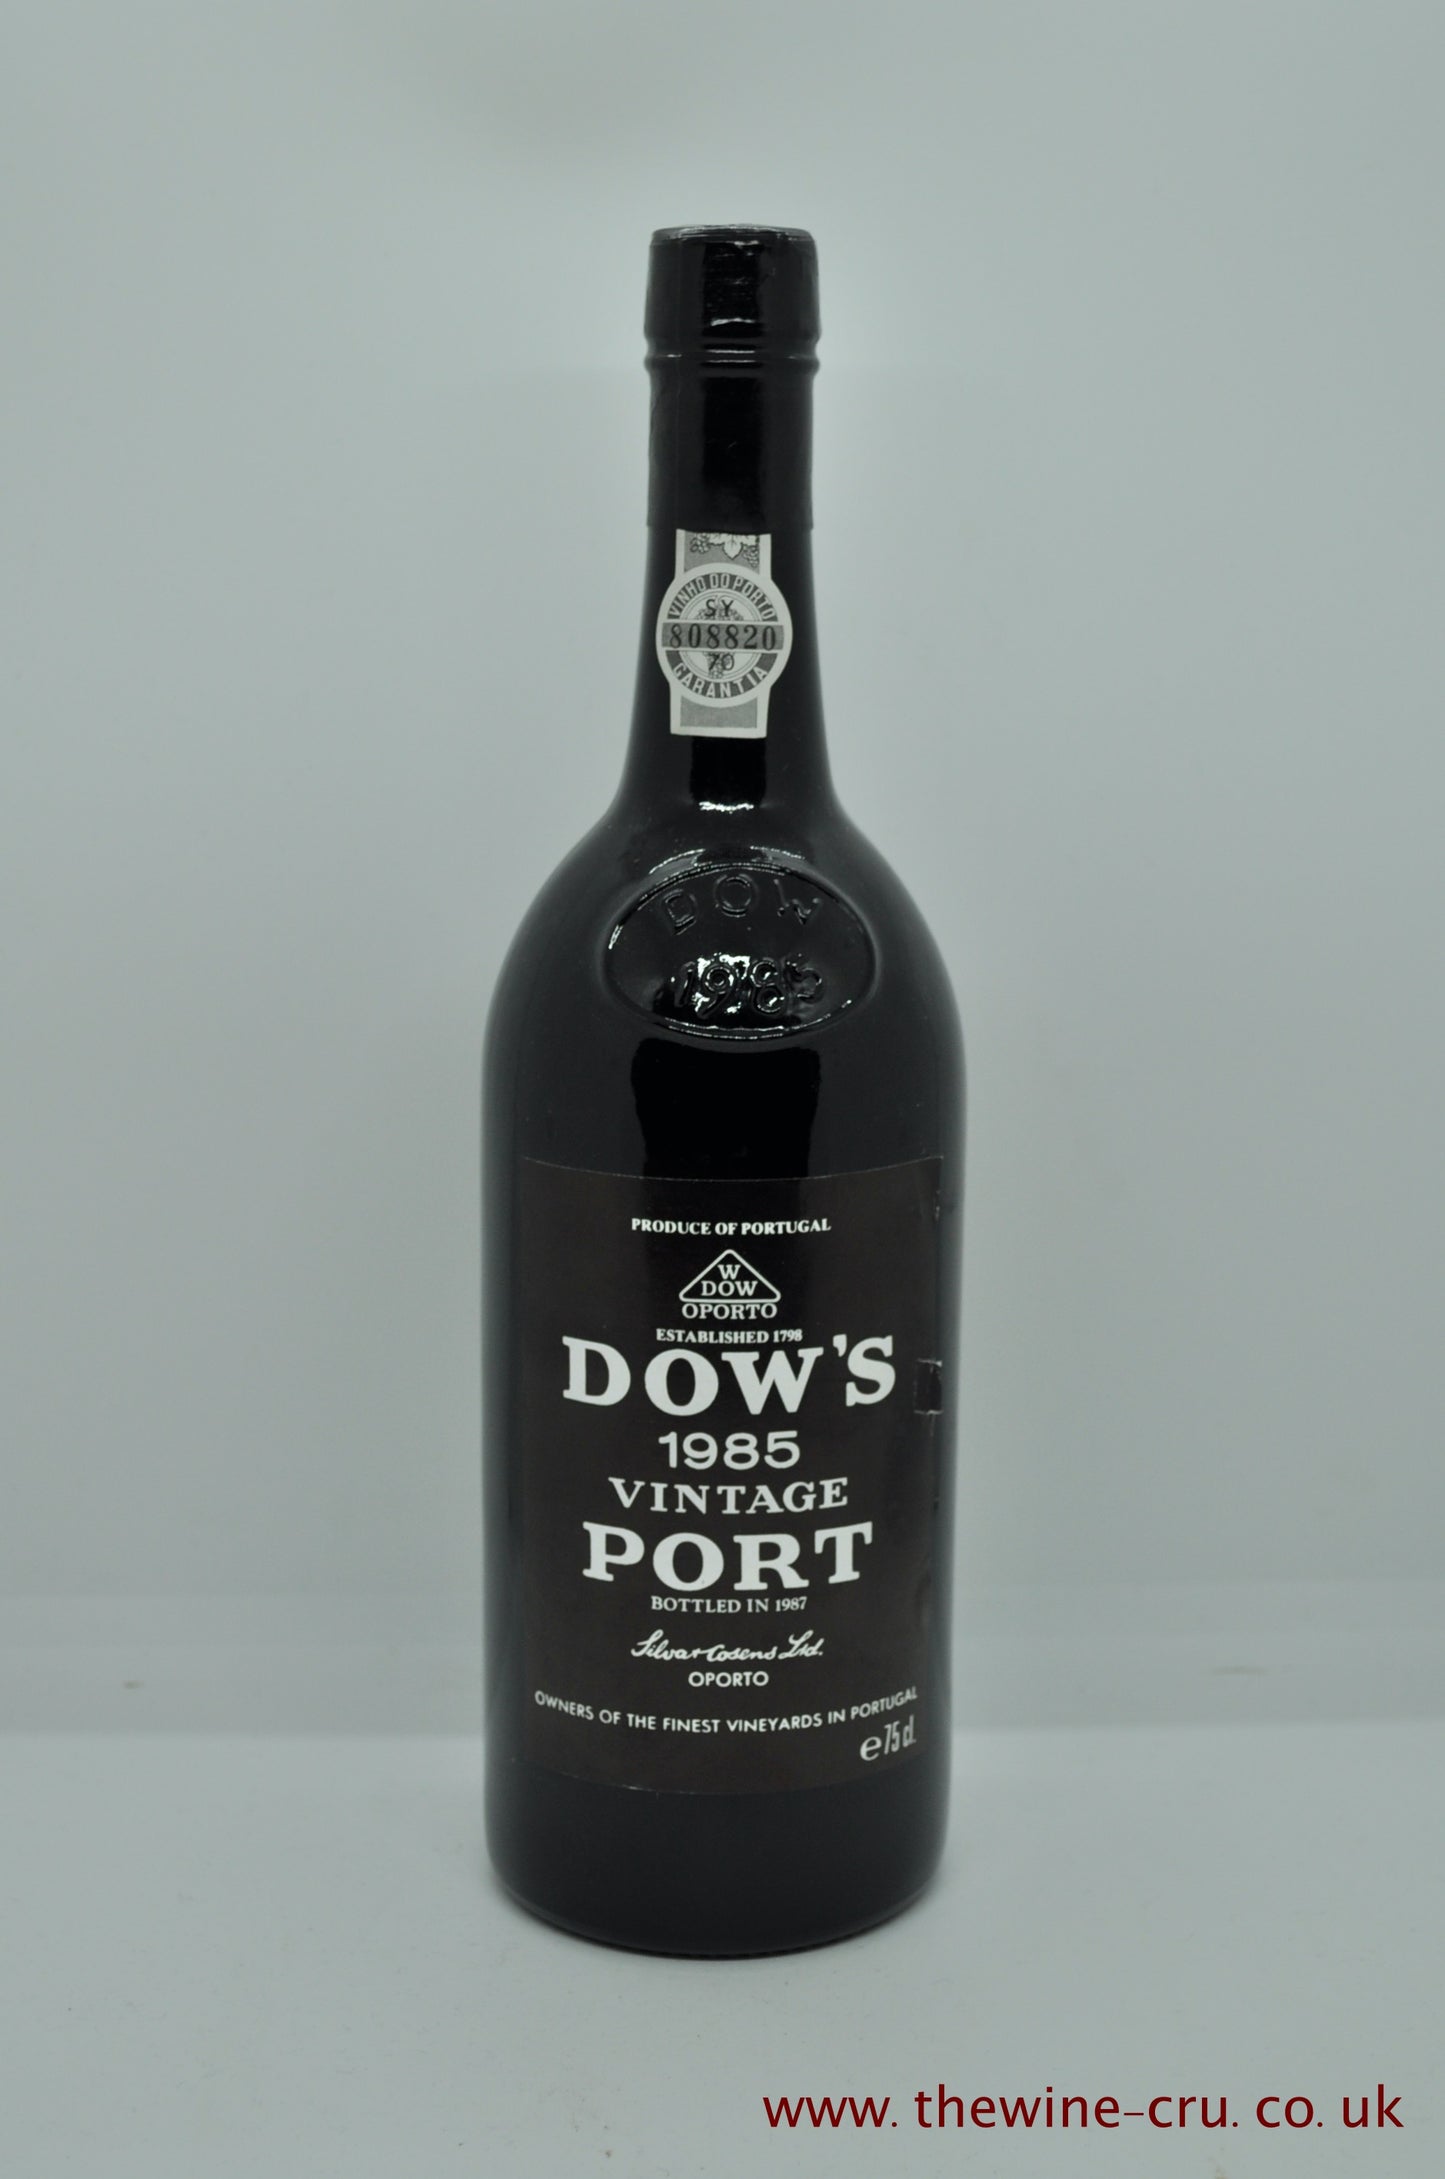 A bottle odf Dow's Vintage port 1985. Portugal. The bottle is in good condition. Immediate delivery. Free local delivery. Gift wrapping available. 